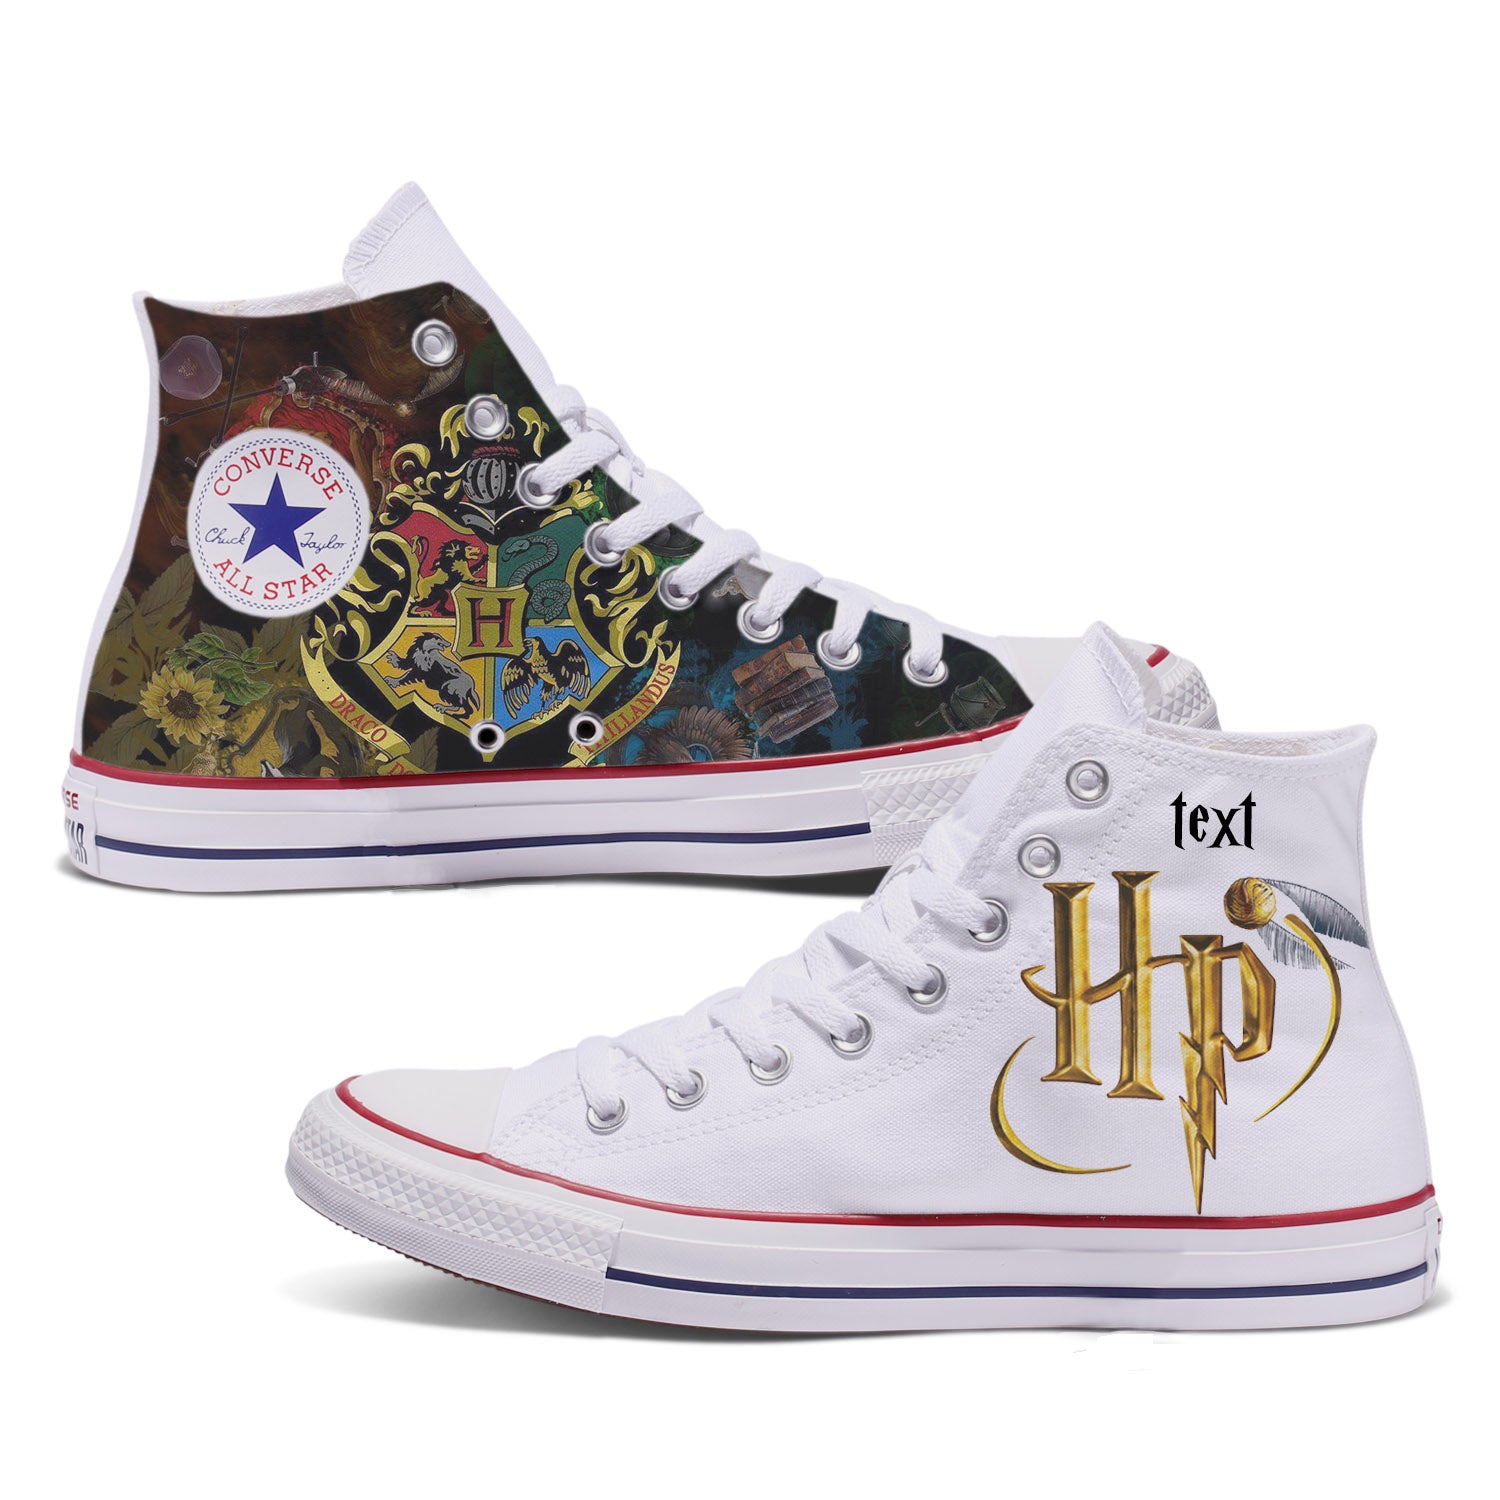 converse harry potter collection